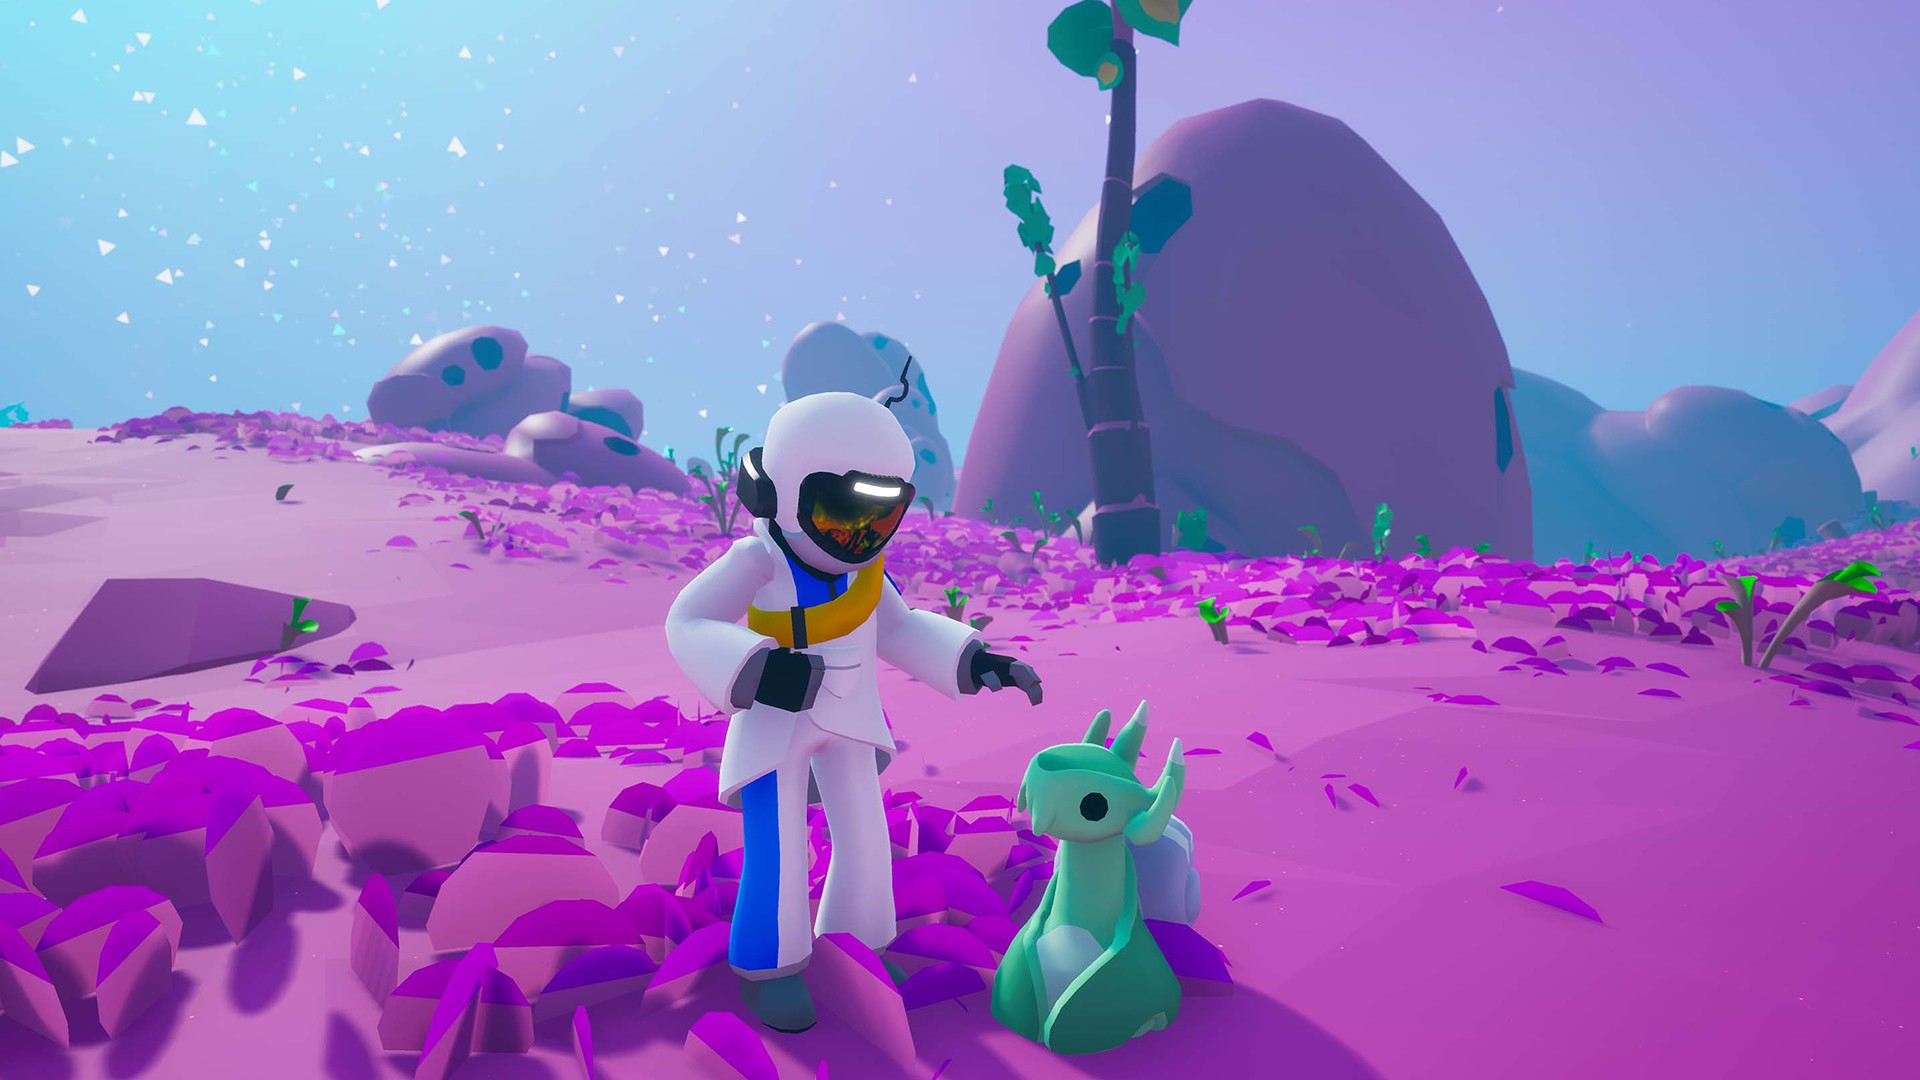 Save 55% on ASTRONEER on Steam